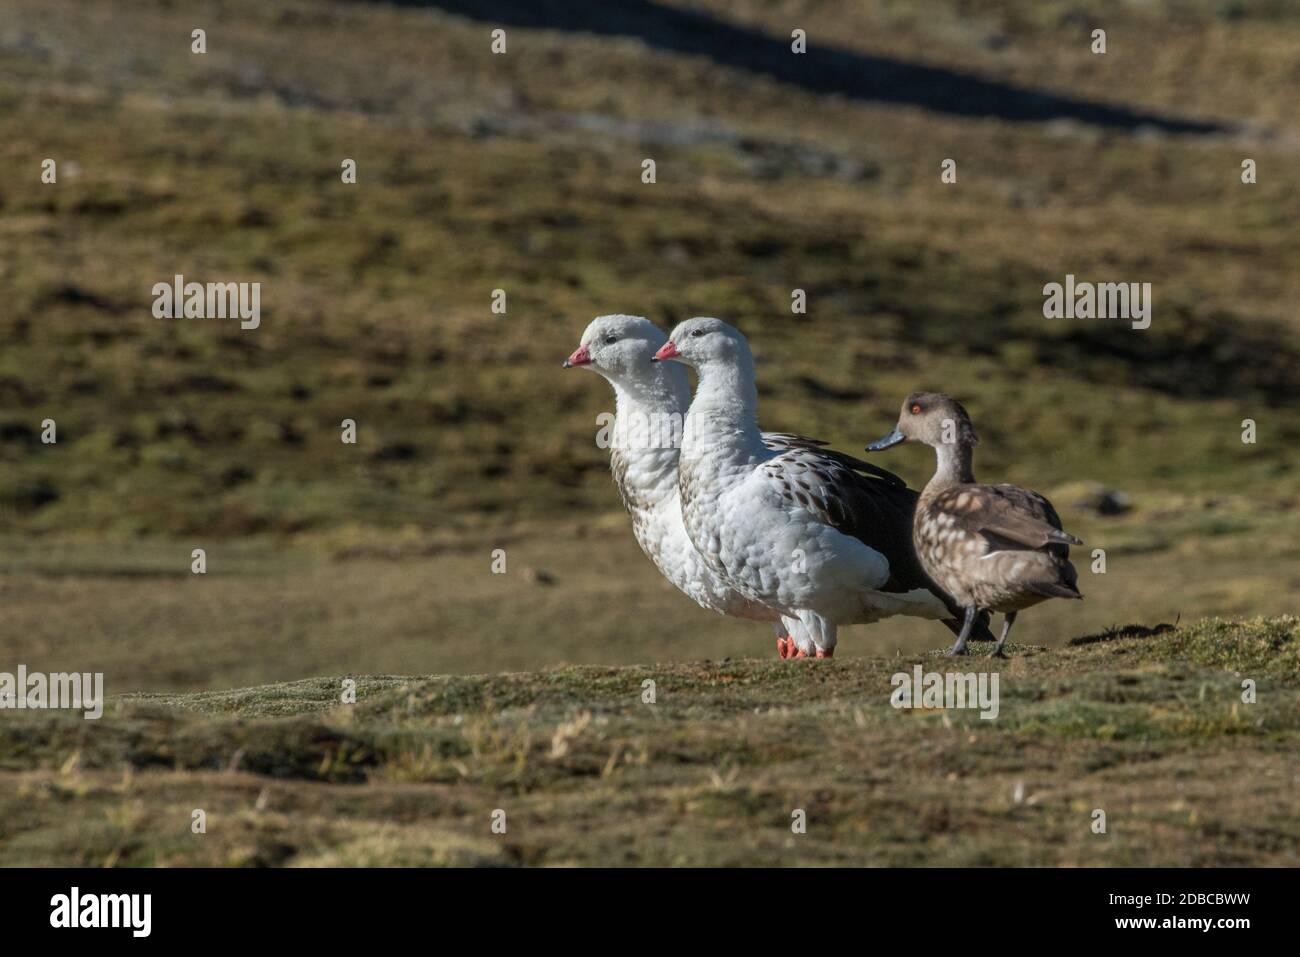 A pair of andean geese (Neochen melanoptera) and an Andean crested duck (Lophonetta specularioides alticola) in high elevation puna in the Andes. Stock Photo